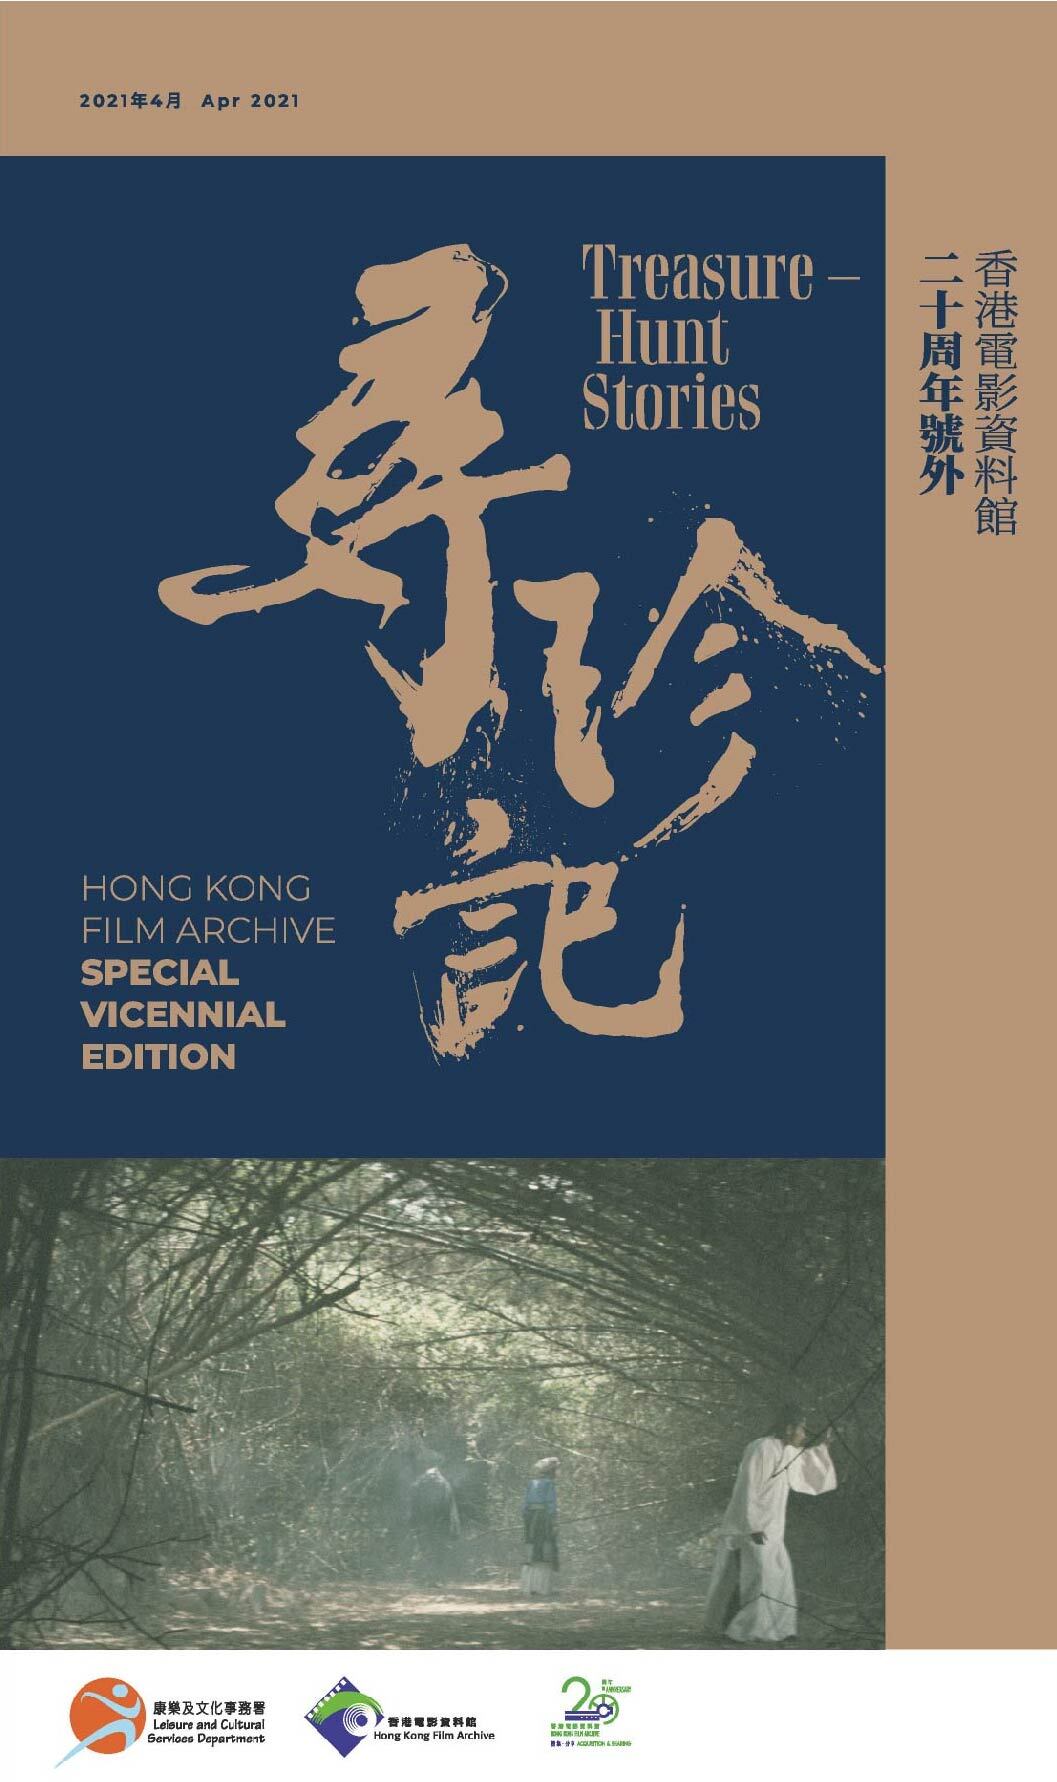 Hong Kong Film Archive Special Vicennial Edition (PDF format, about 15.7MB)